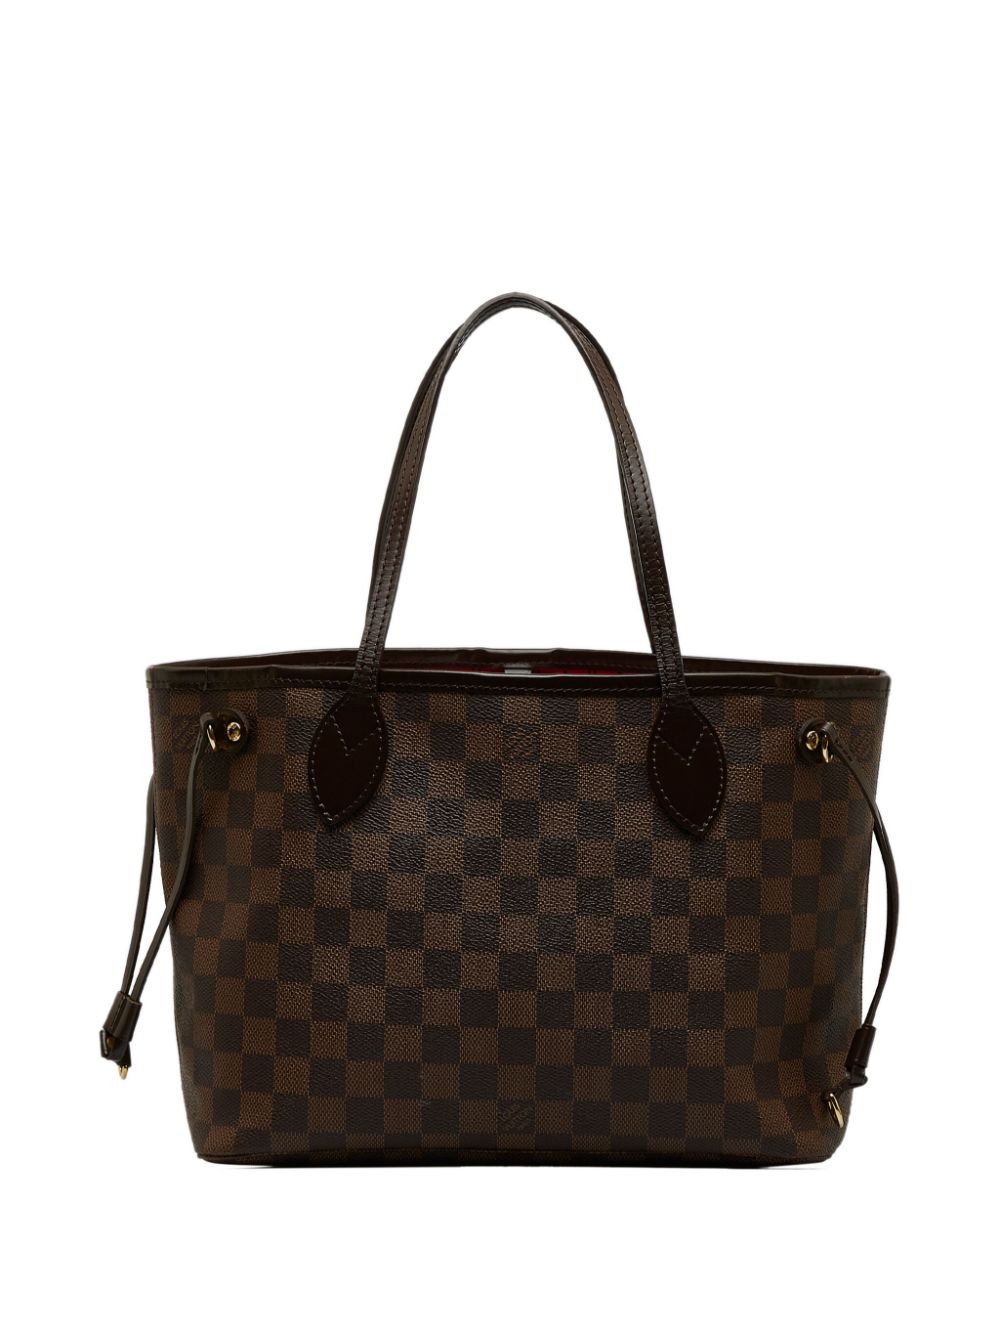 Louis Vuitton 2010 pre-owned Neverfull PM tote bag - Bruin